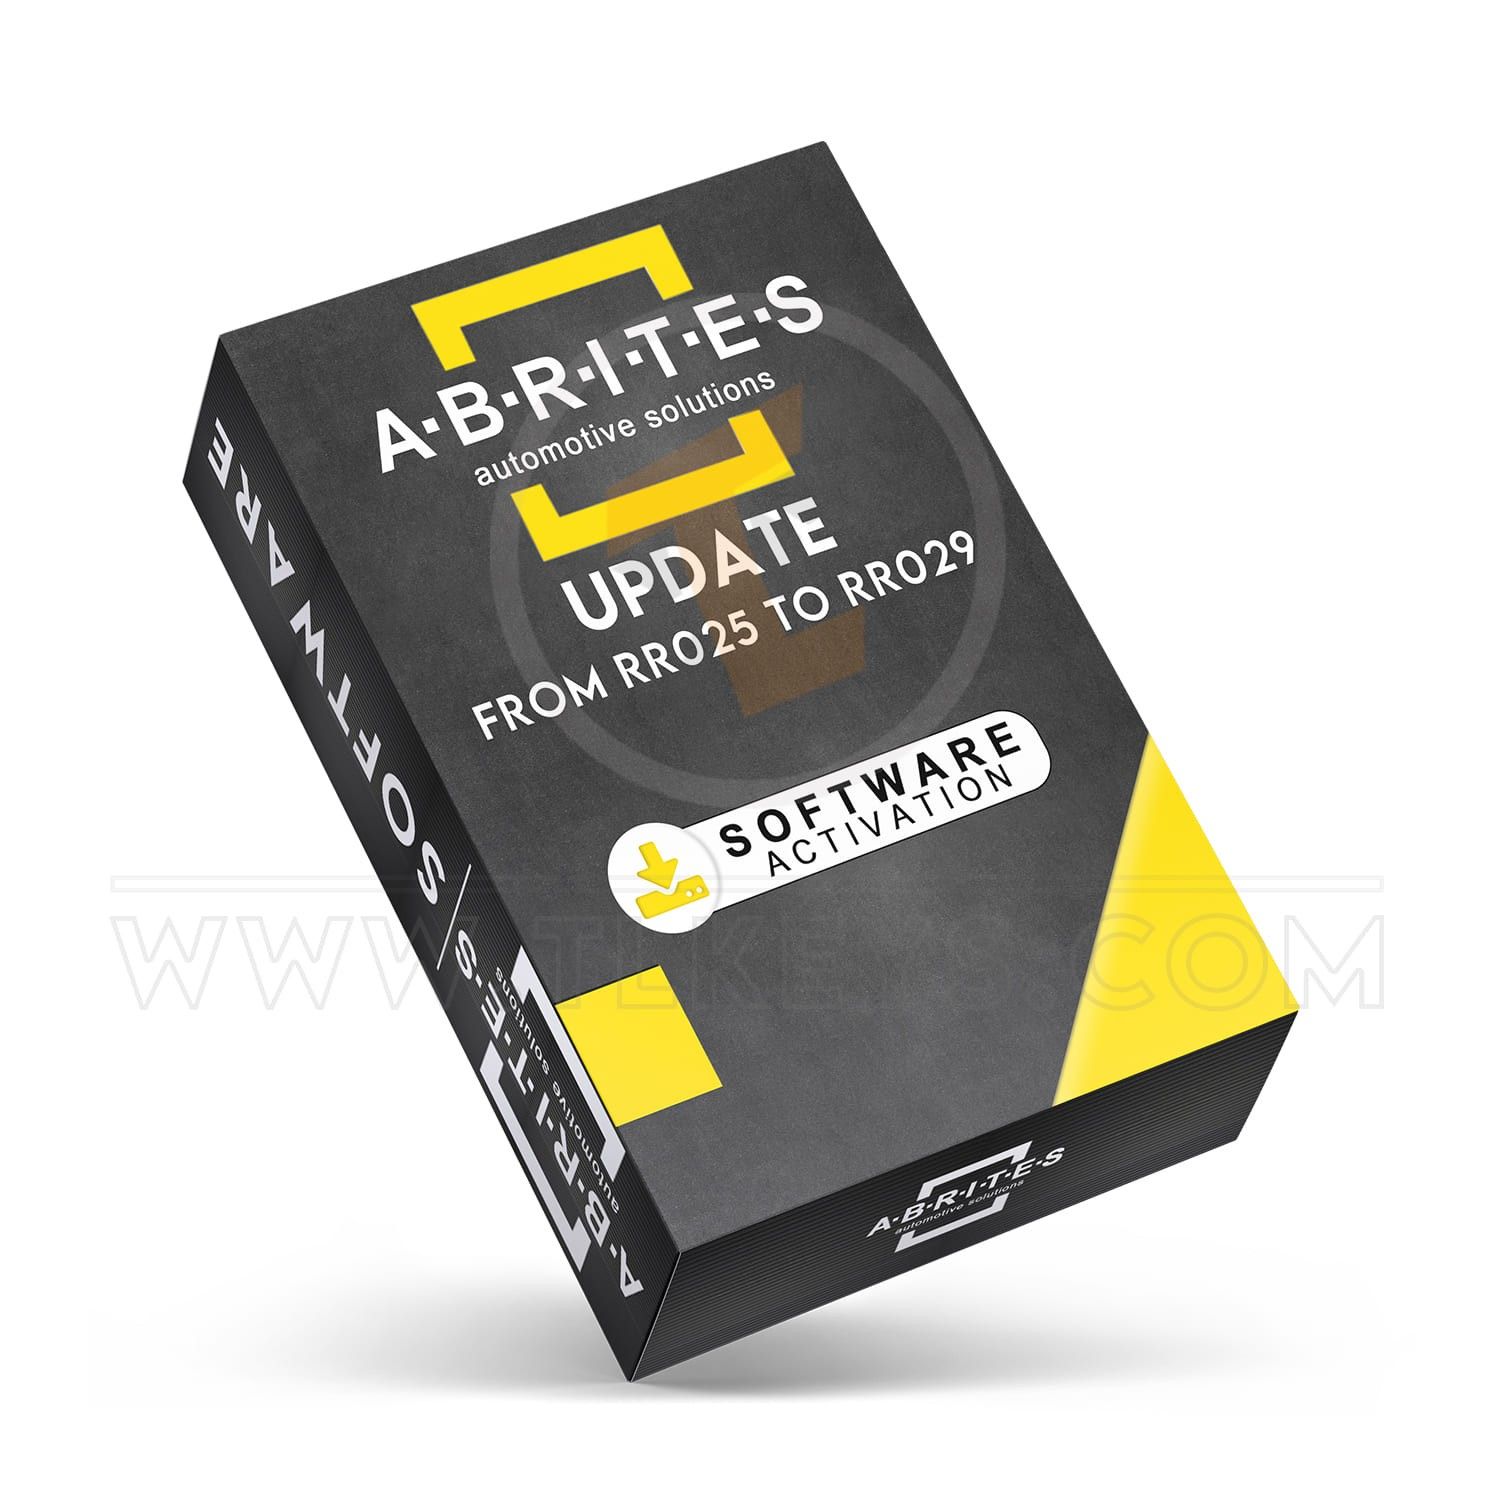 Abrites Software Update from RR025 to RR029 software